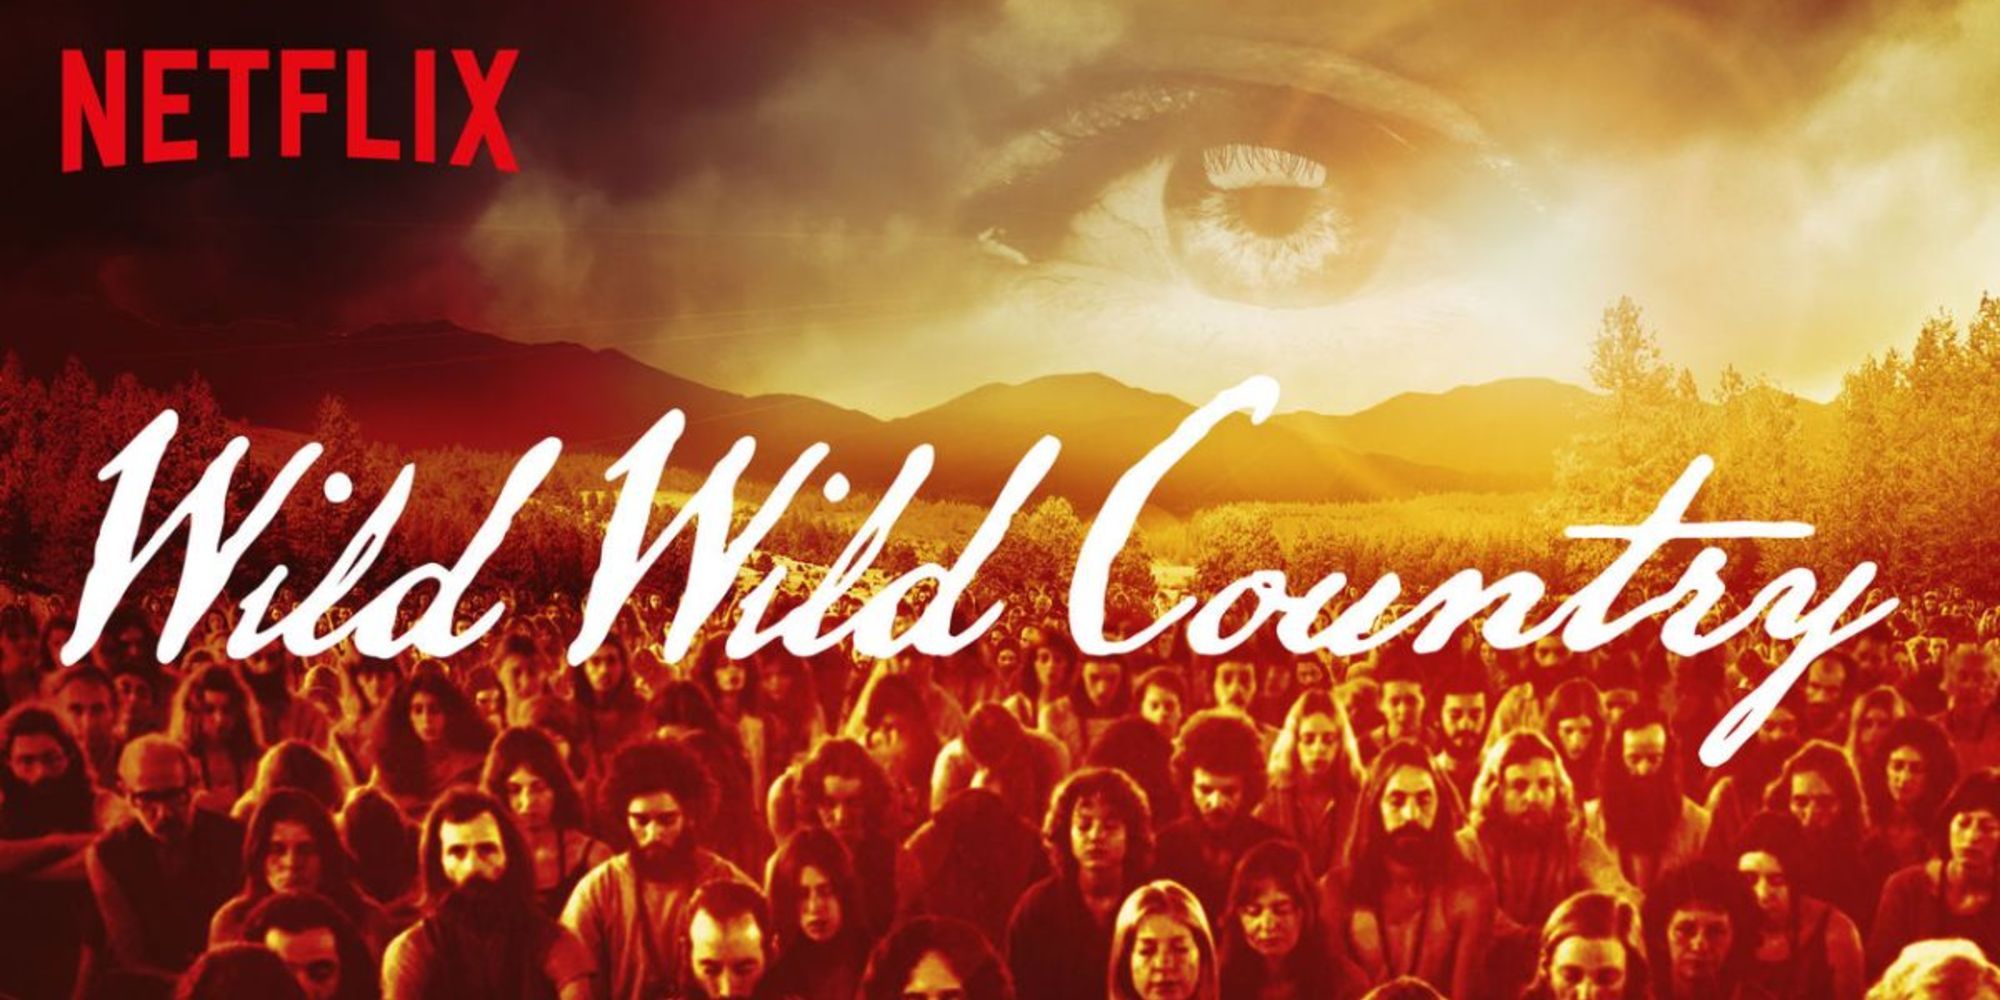 Netflixs Have A Good Trip Adventures In Psychedelics 9 Other Eccentric Documentaries To Watch Wild Wild Country